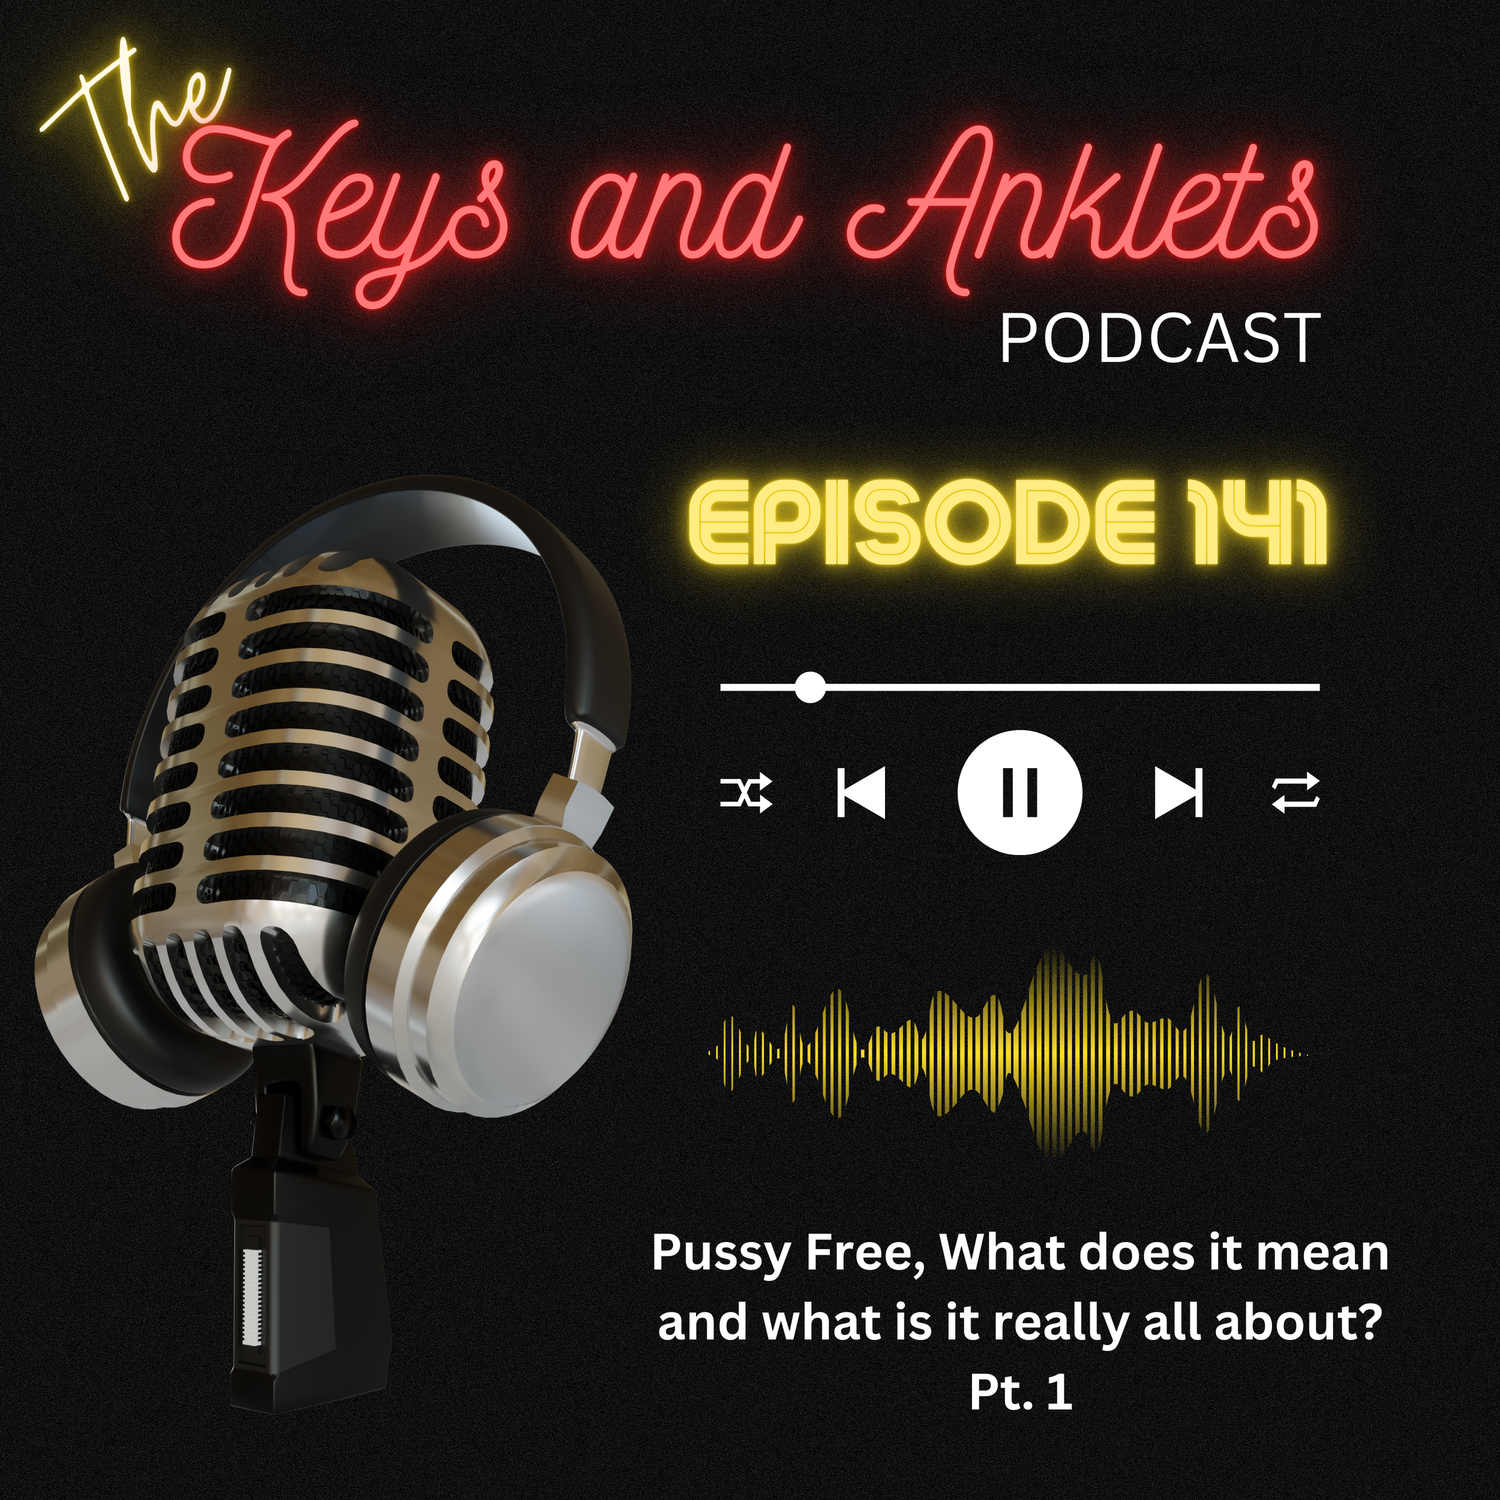 Episode 141 - Pussy Free Cucks, What is that really all about?